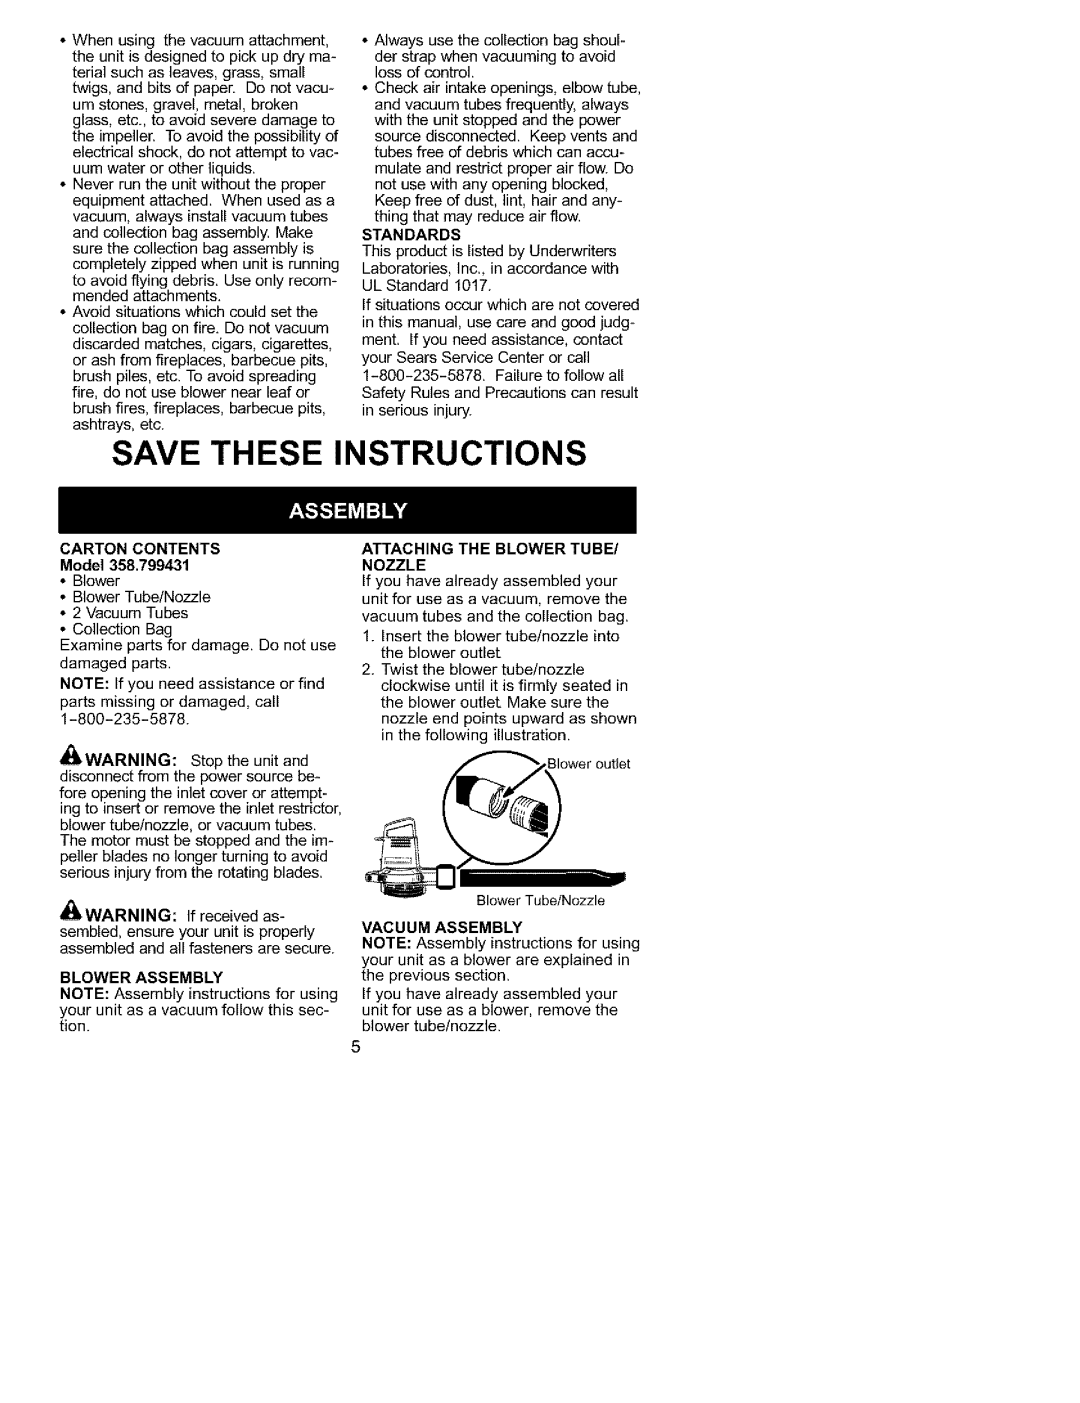 Craftsman 358.799431 manual Save These Instructions, Standards, CARTON CONTENTS Model, Attaching The Blower Tube/ Nozzle 